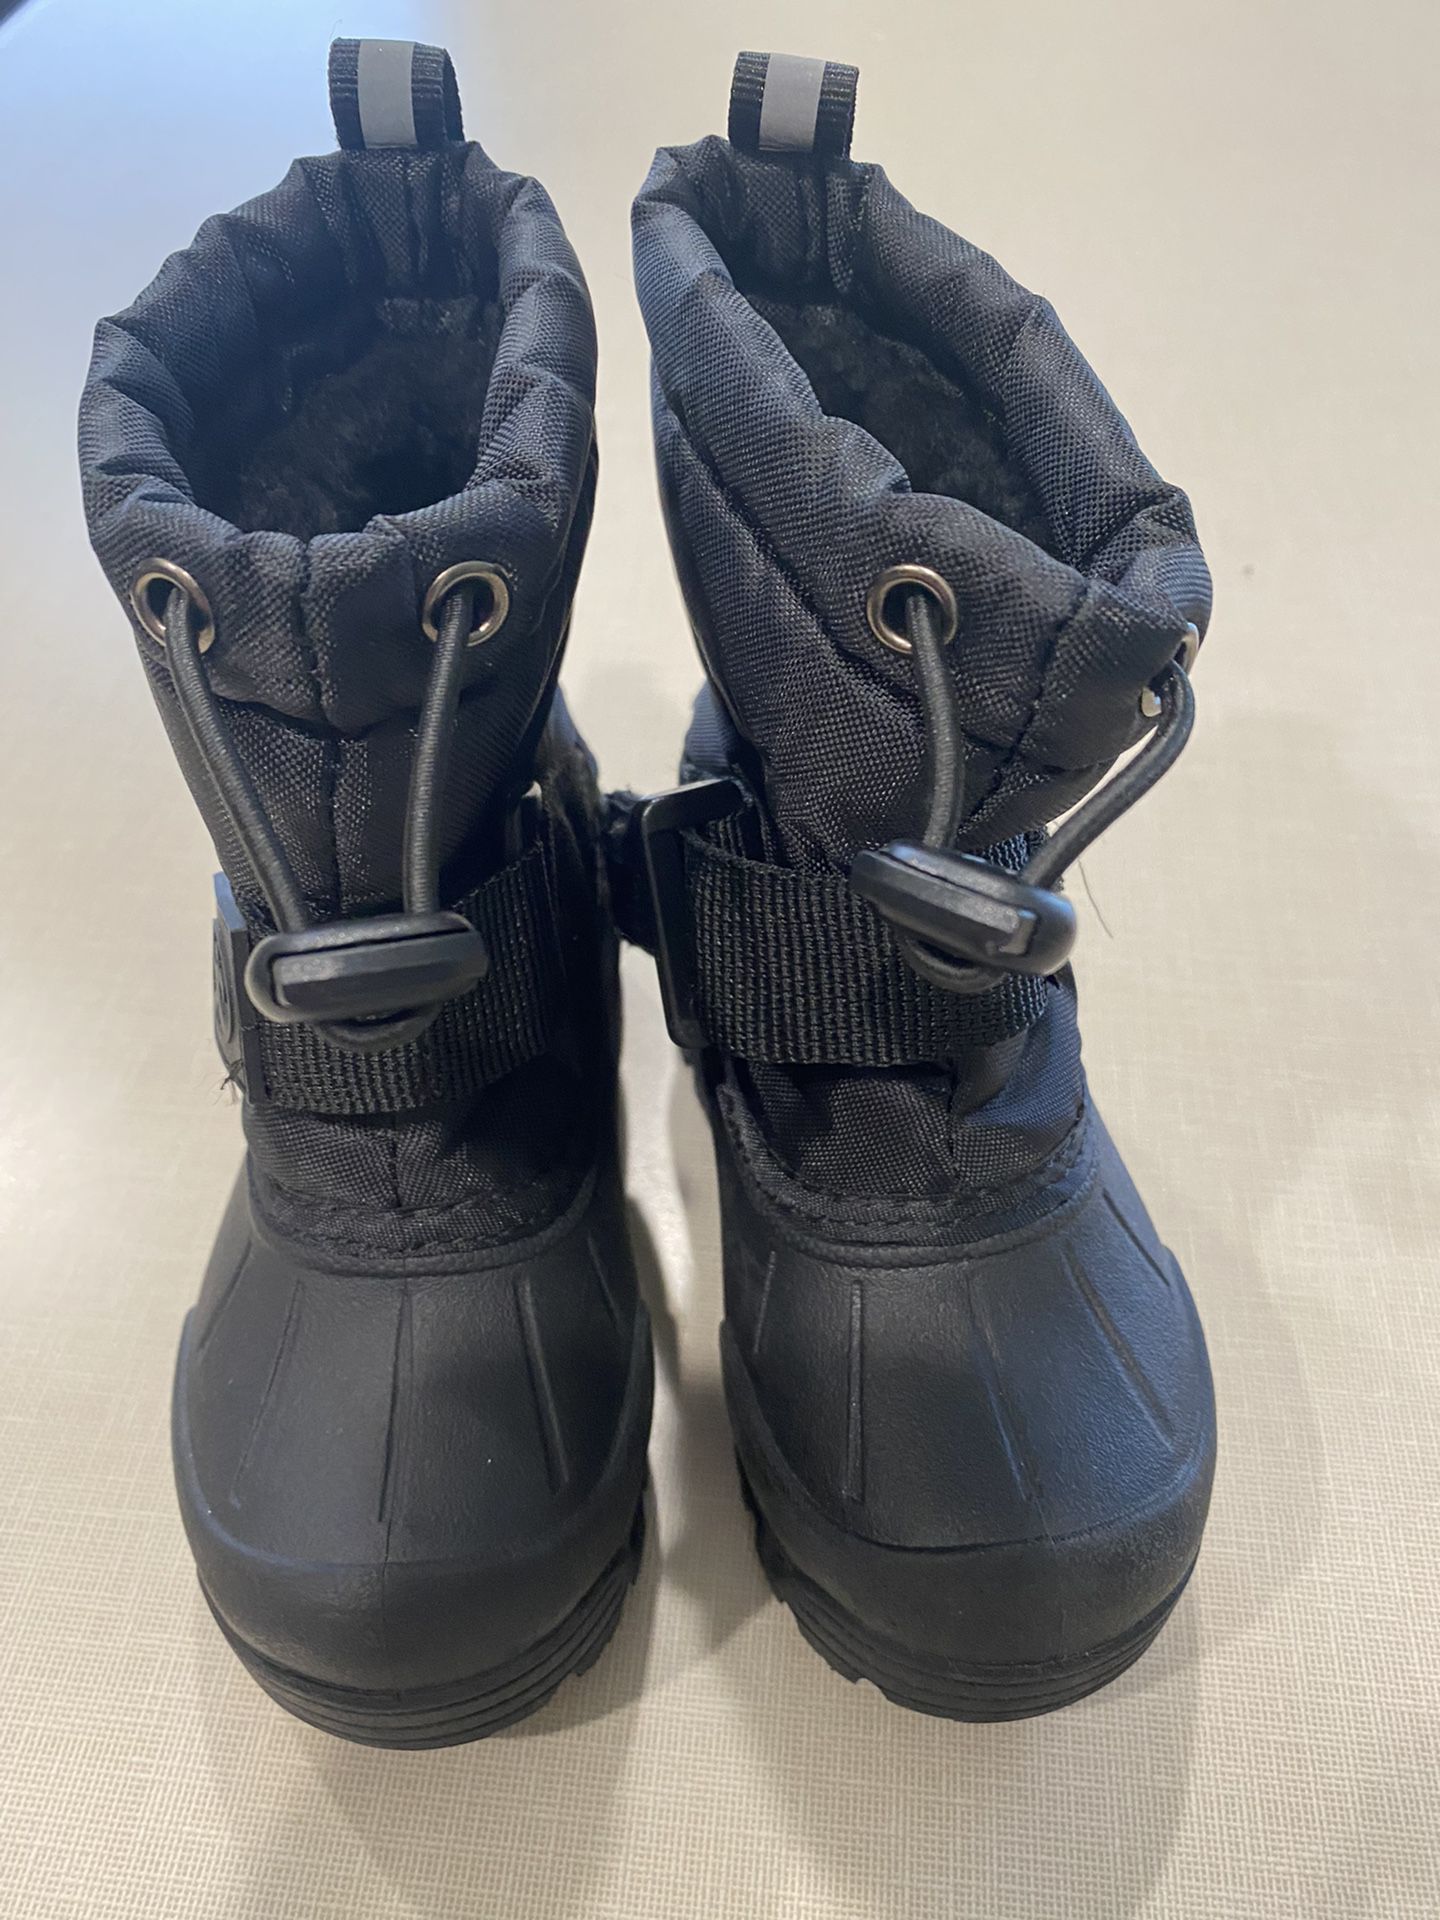 Northside Snow Boots Baby Toddler Size 5